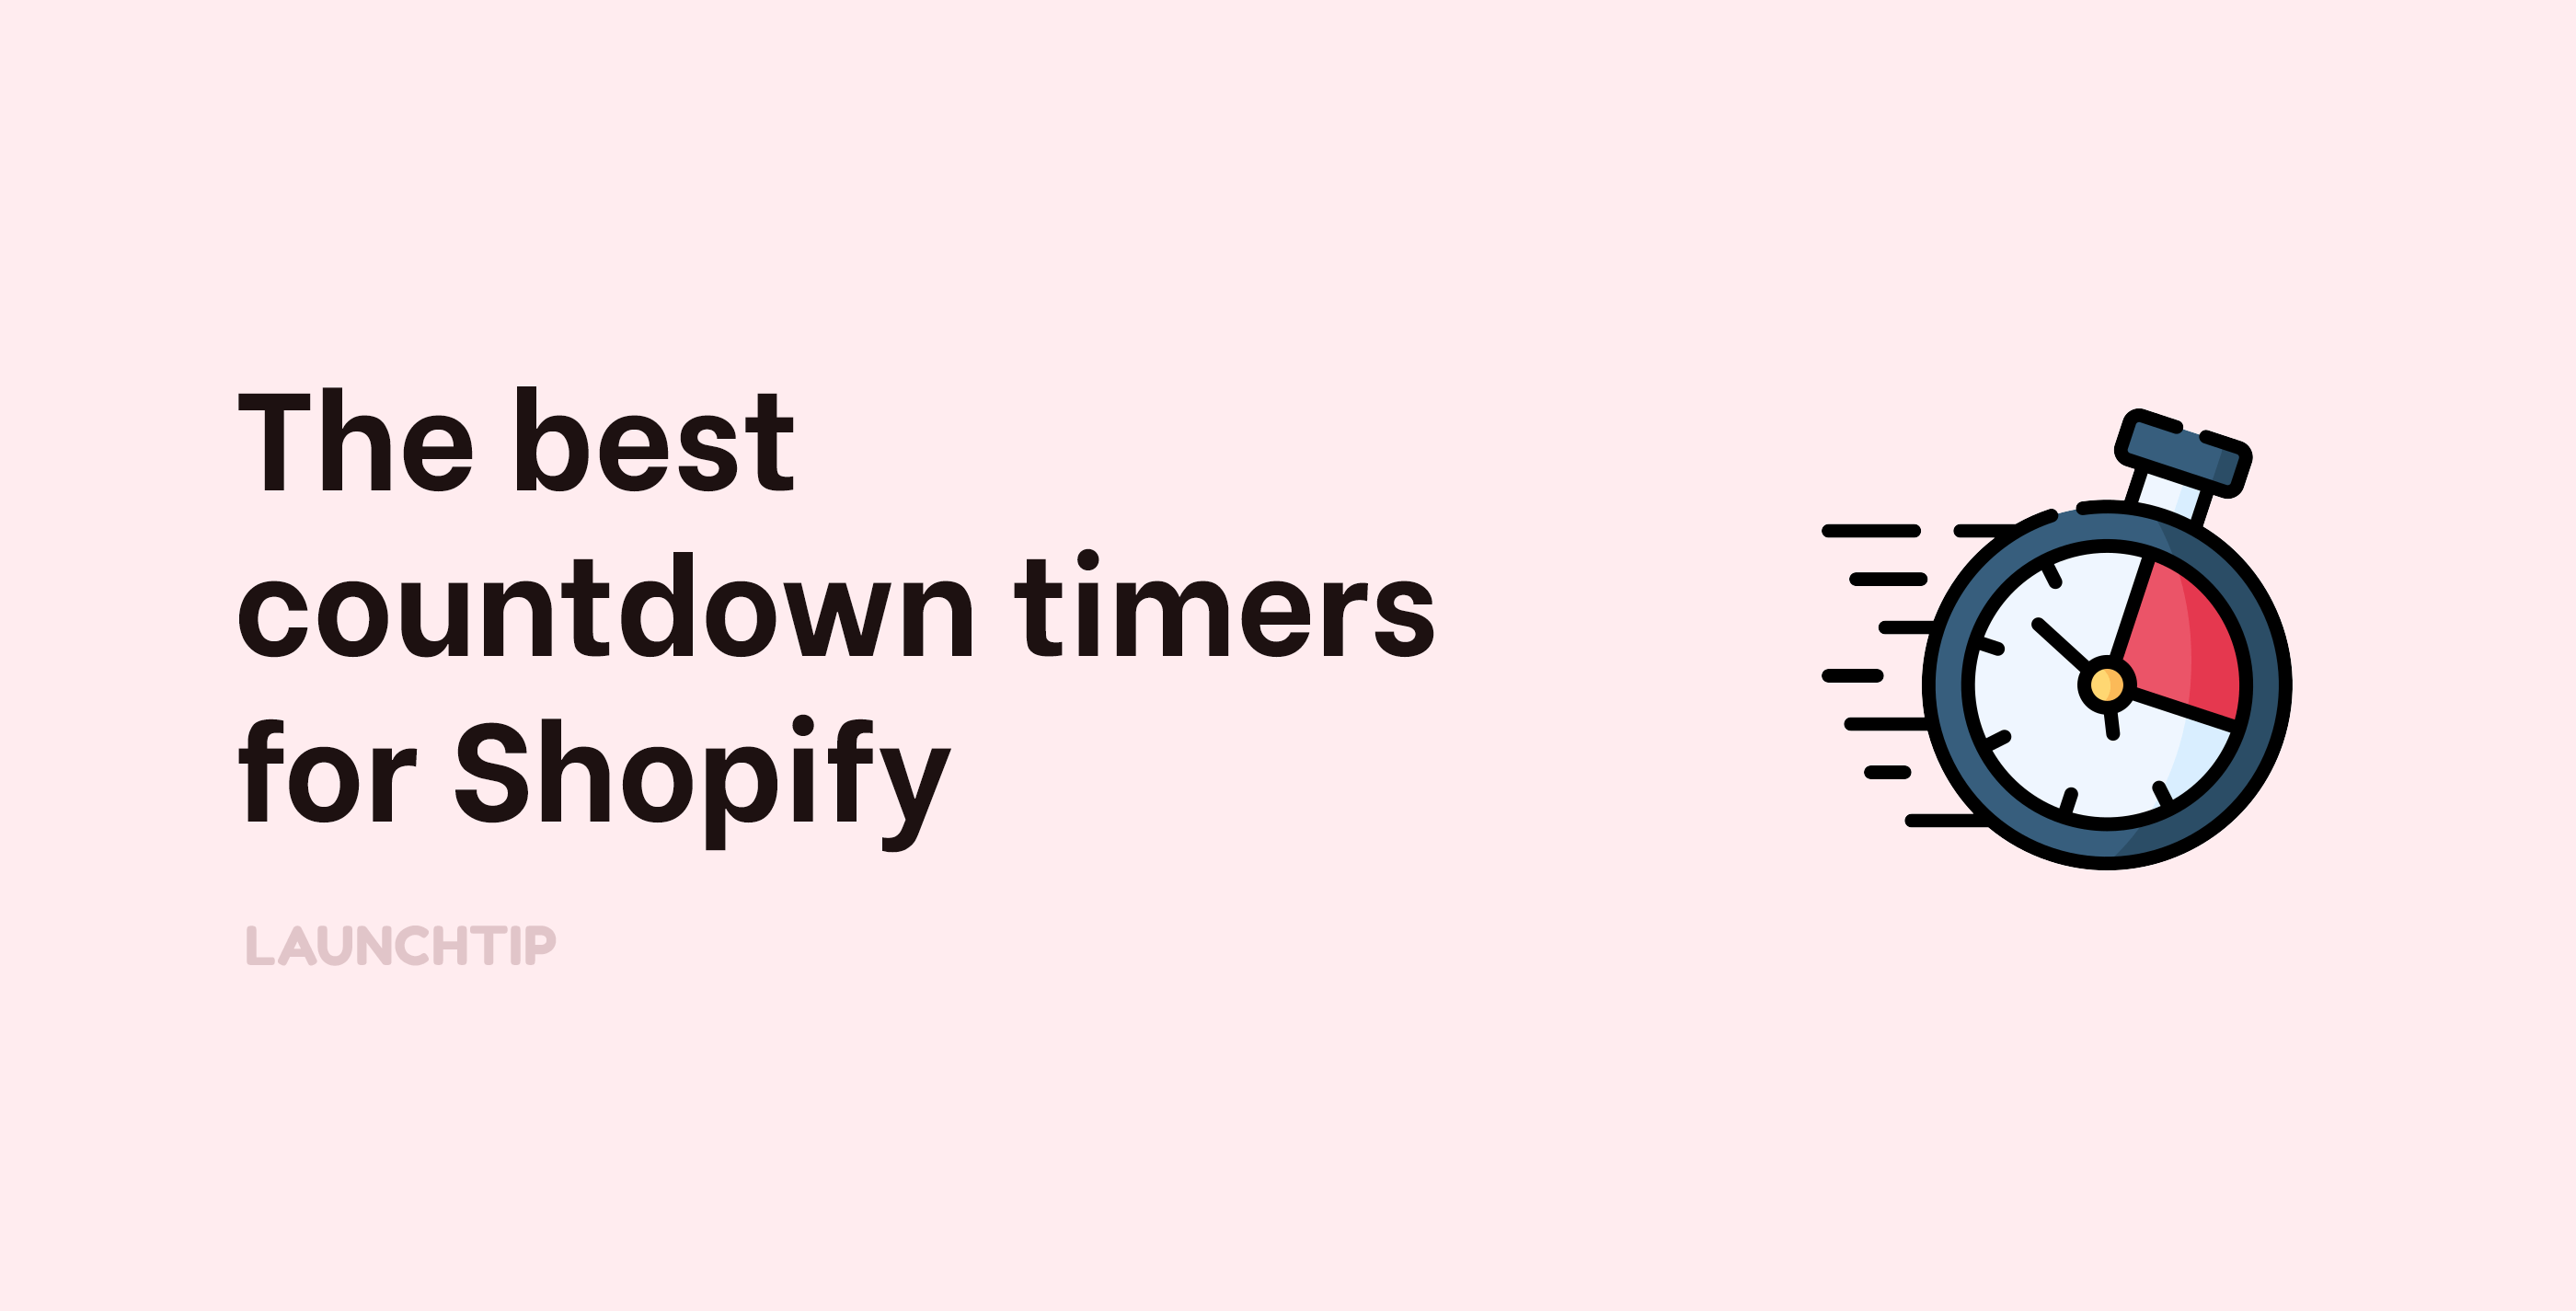 Best countdown timers for Shopify